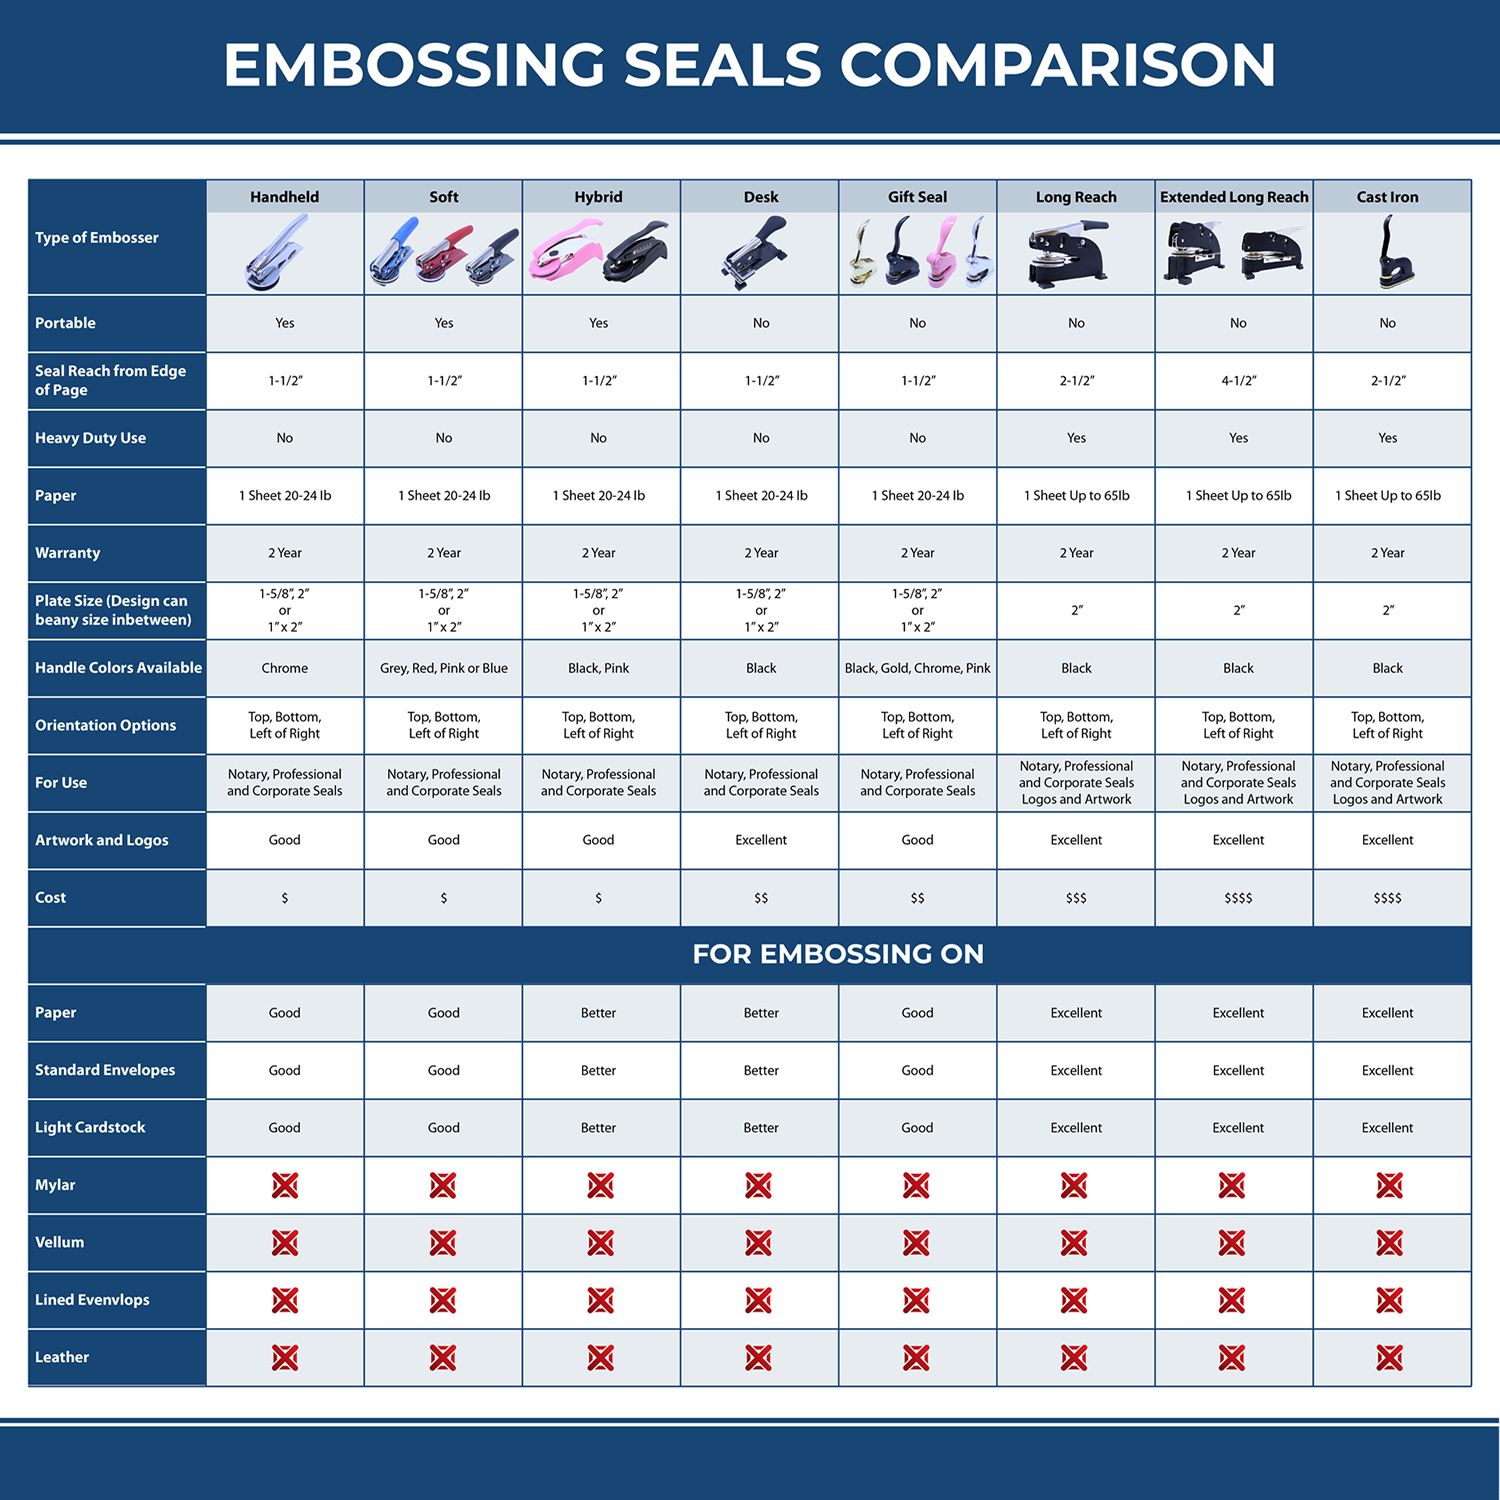 A comparison chart for the different types of mount models available for the Long Reach Virginia Land Surveyor Seal.